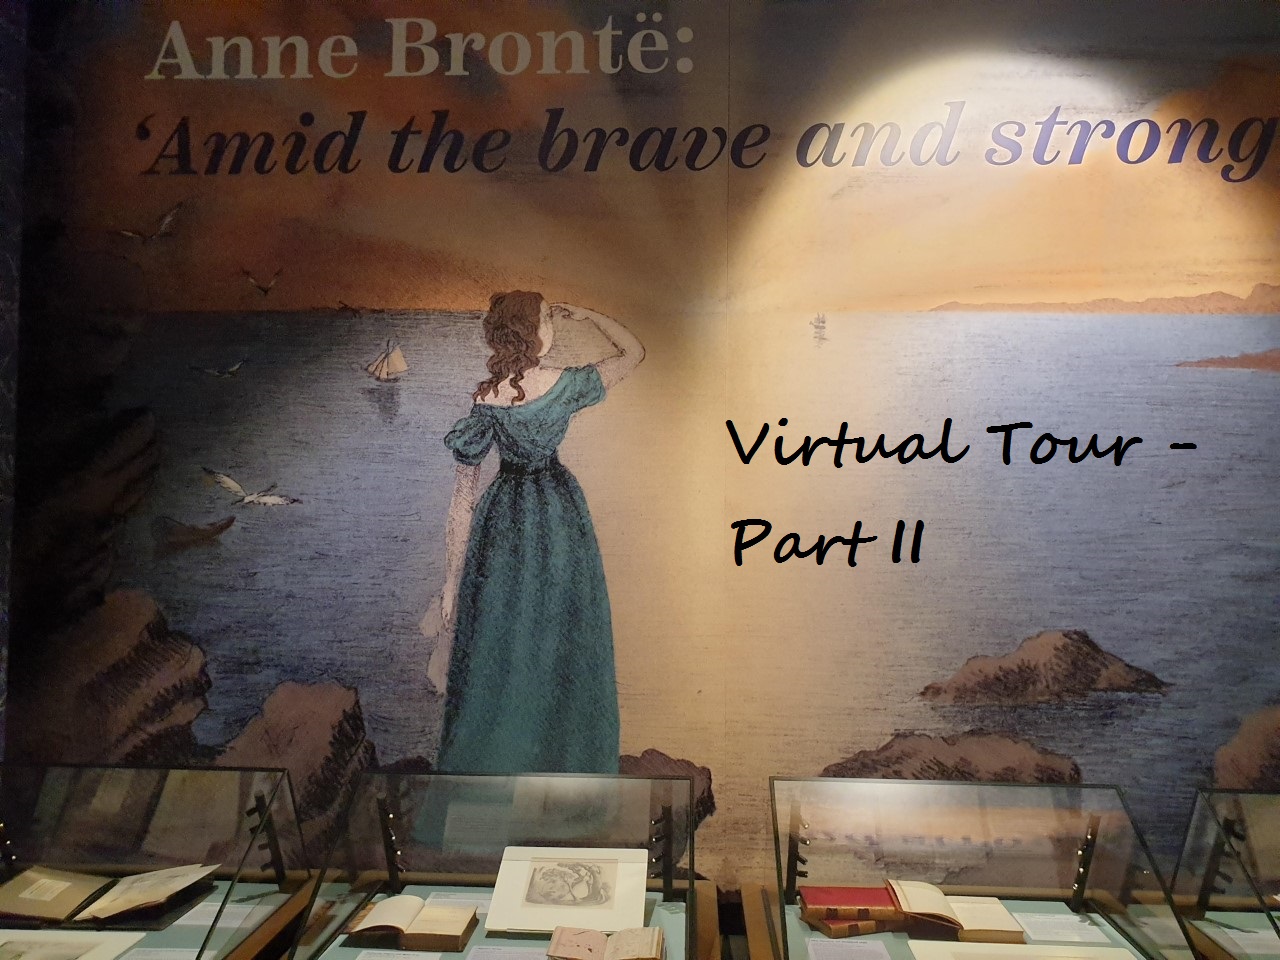 In Search of Anne Brontë by Nick Holland